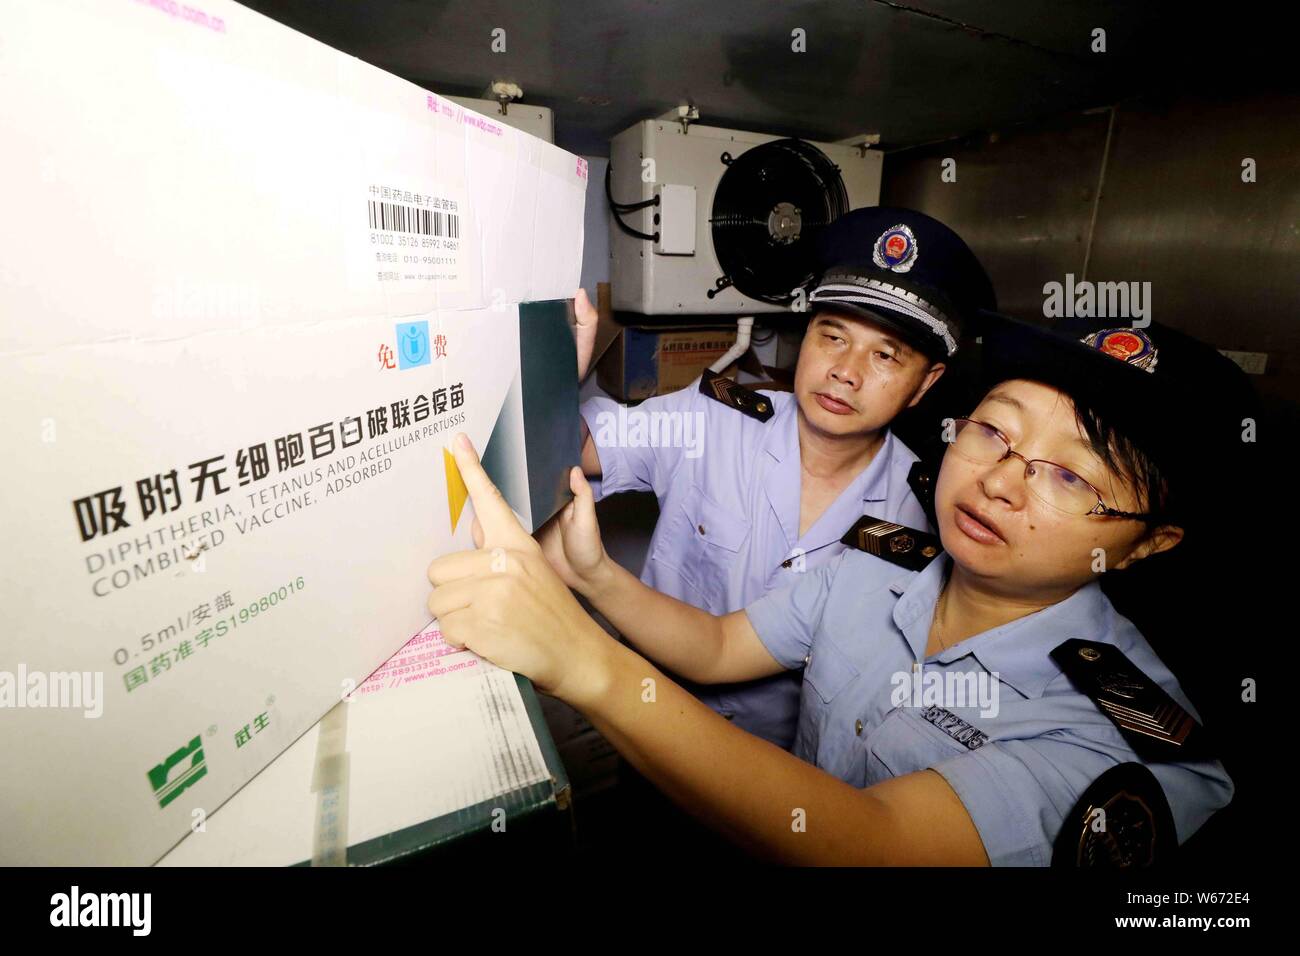 Chinese law enforcement officers examine diphtheria, tetanus and acellular pertussis combined vaccines at the vaccine warehouse of a disease control a Stock Photo